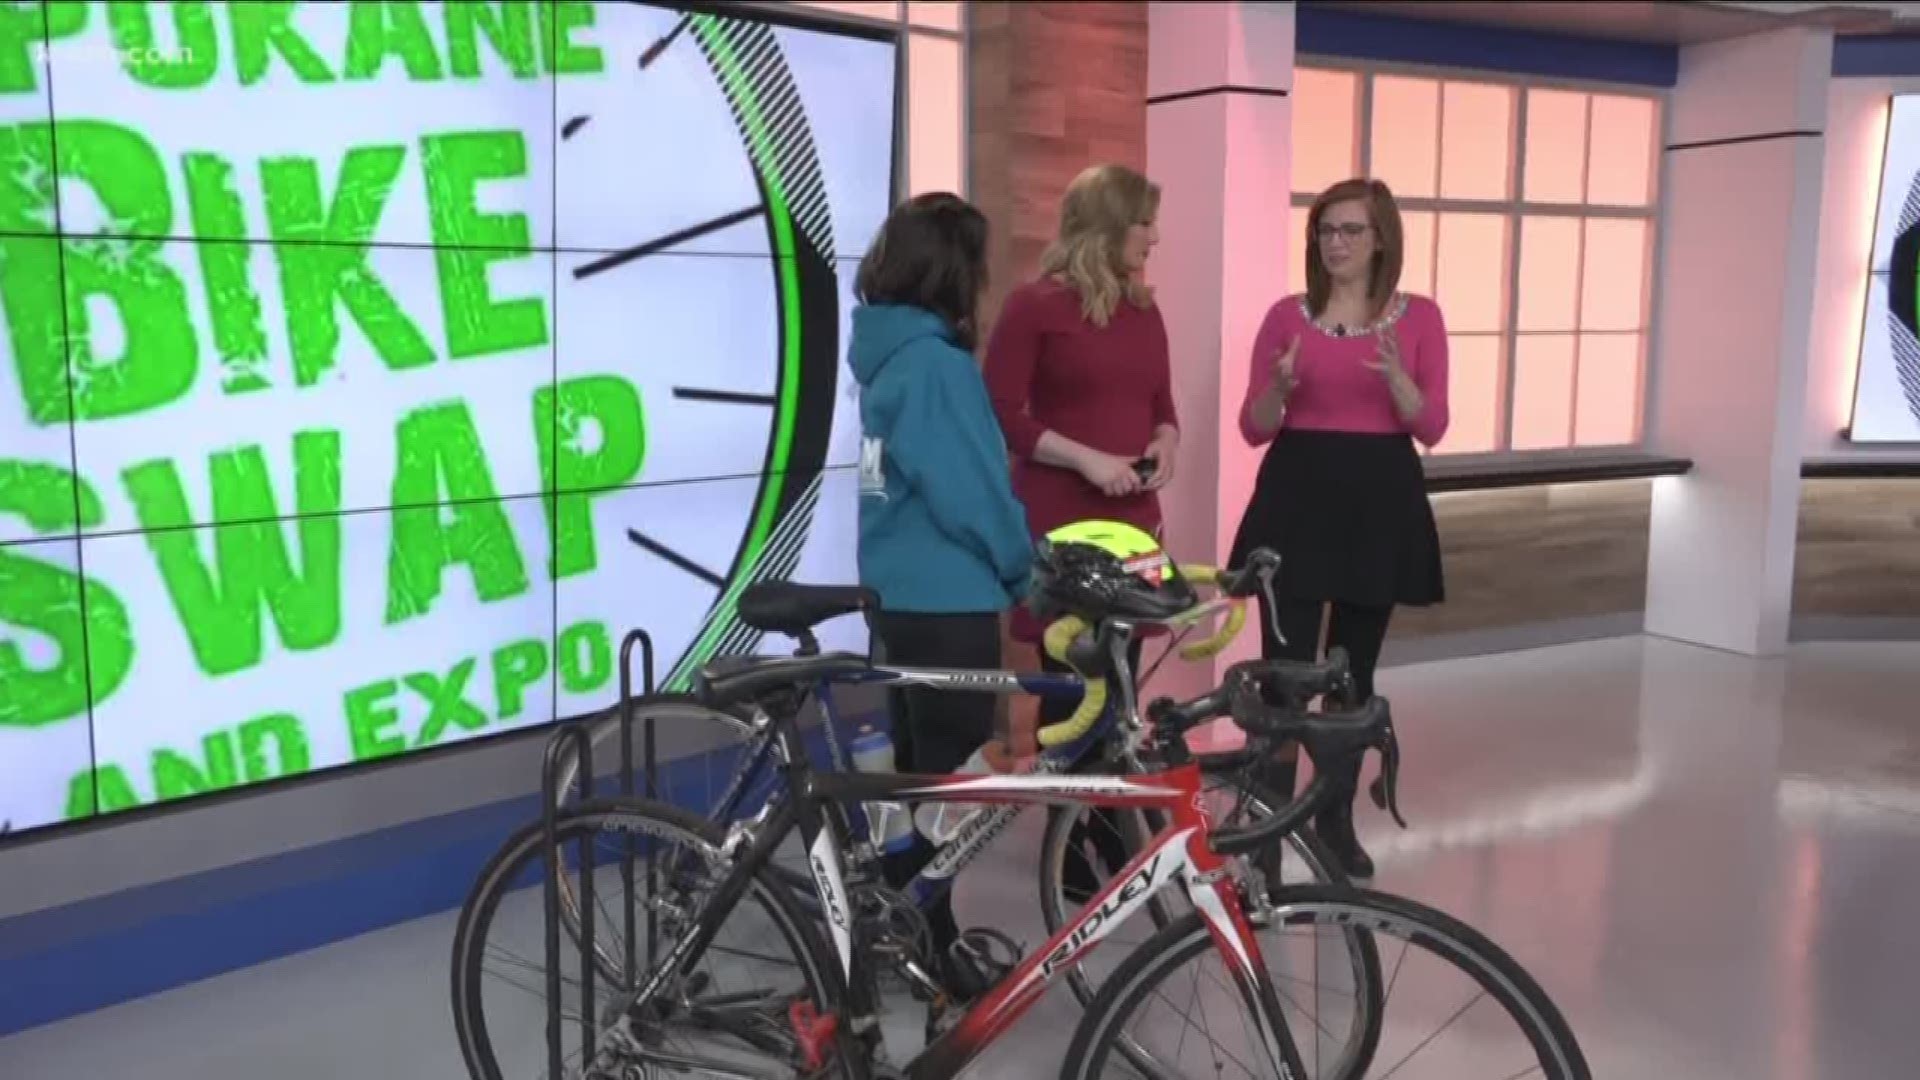 KREM's Jen York and Brittany Bailey get the low-down on the upcoming Spokane Bike Show & Expo from the event's director, LeAnn Yamamoto.